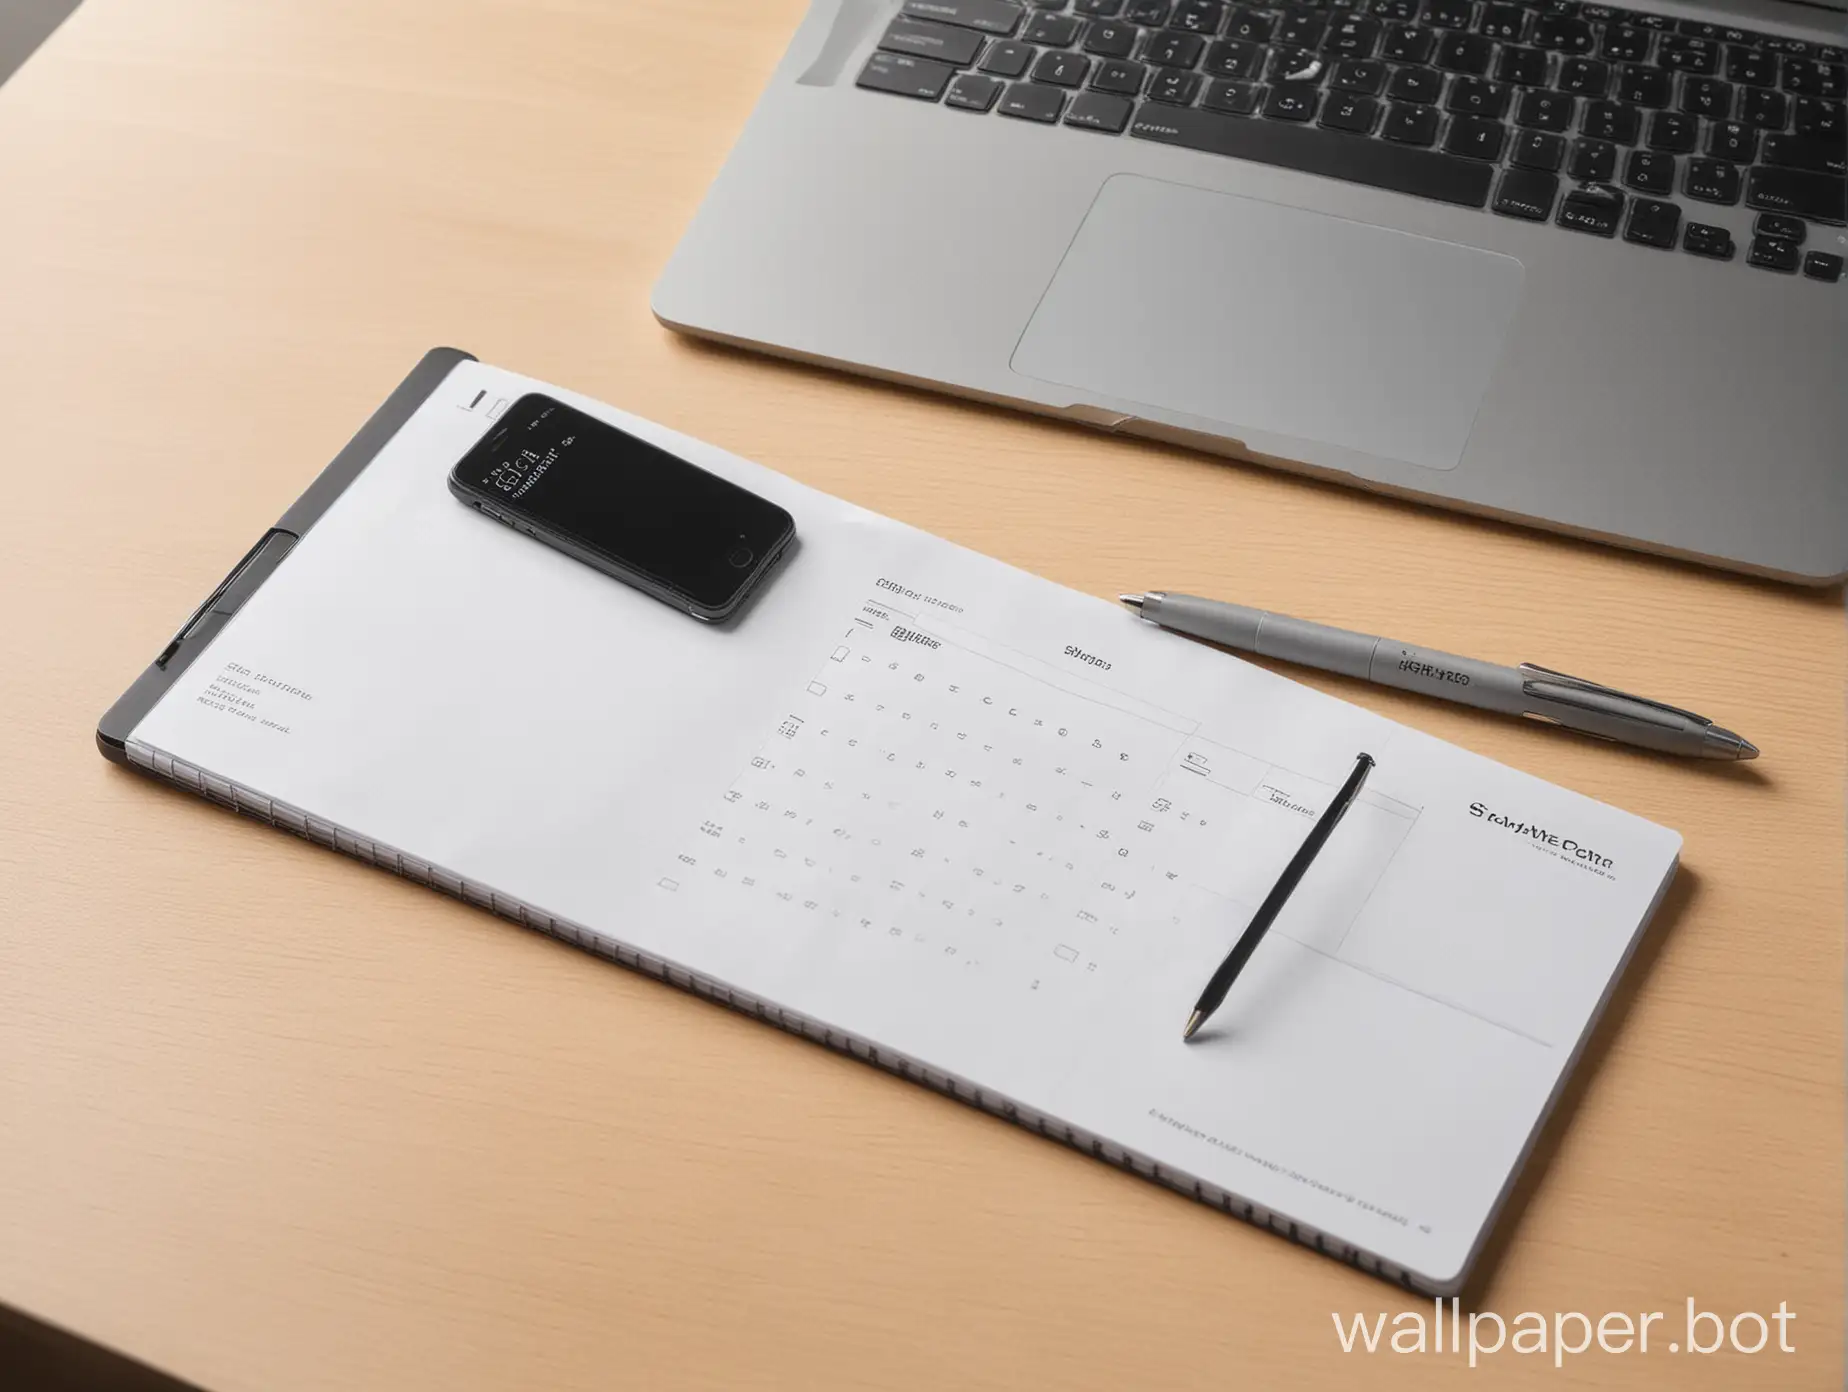 A modern, uncluttered desk setup with a sleek laptop, a minimalist notepad, and a stylish pen.
Close-up shot of a laptop keyboard with a clean desk background.
Flat lay image of a smartphone displaying a simple expense tracking app interface on a clean desk surface.